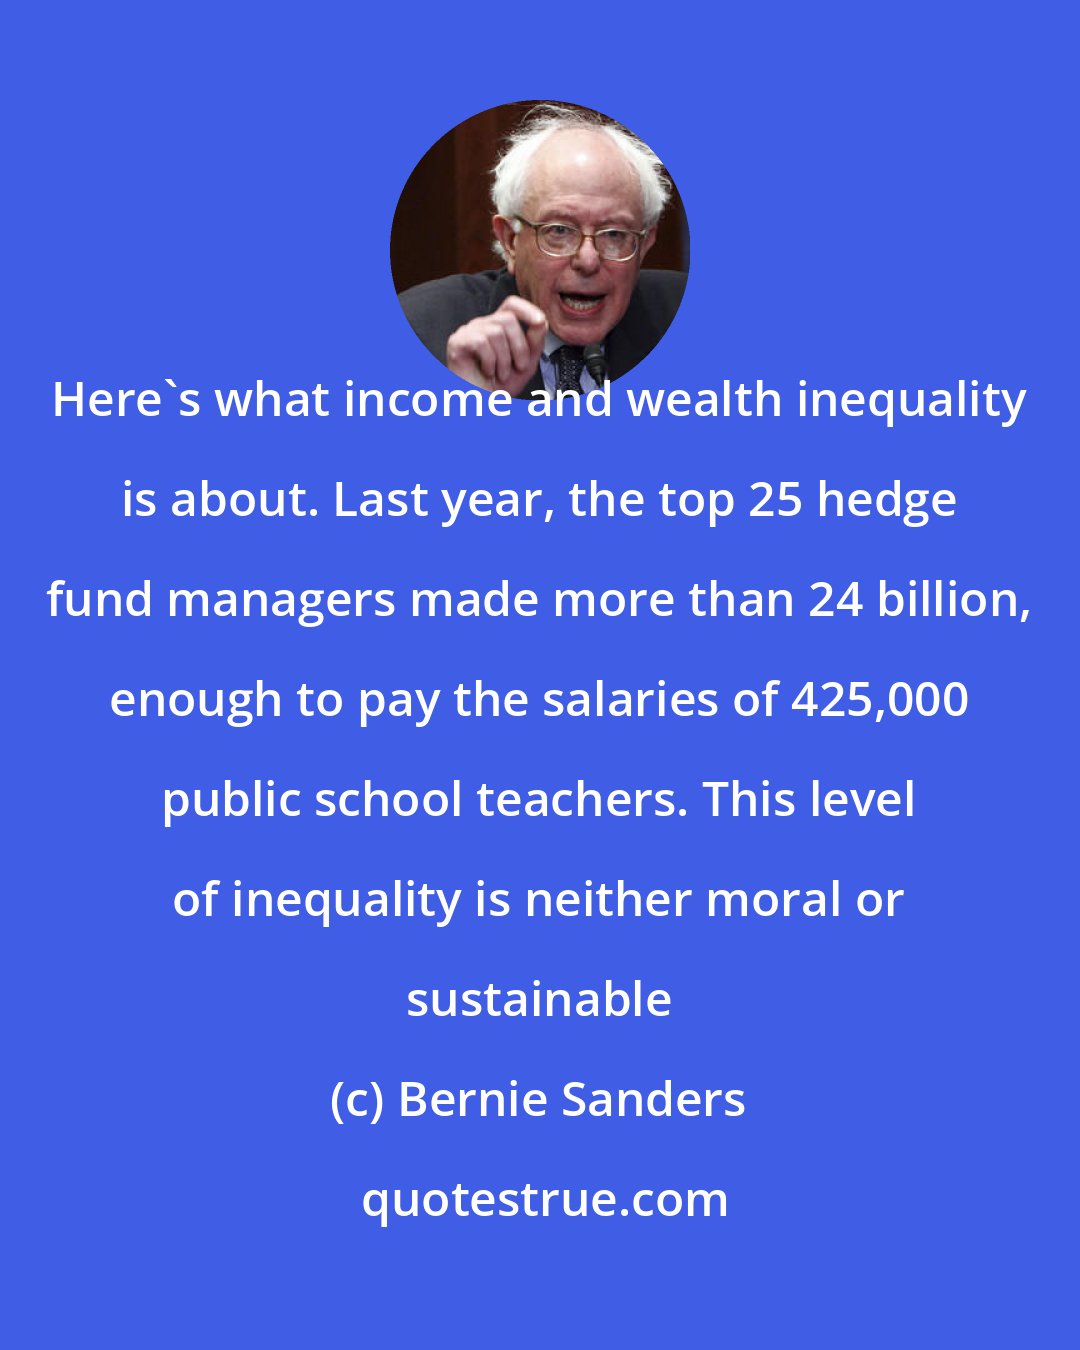 Bernie Sanders: Here's what income and wealth inequality is about. Last year, the top 25 hedge fund managers made more than 24 billion, enough to pay the salaries of 425,000 public school teachers. This level of inequality is neither moral or sustainable